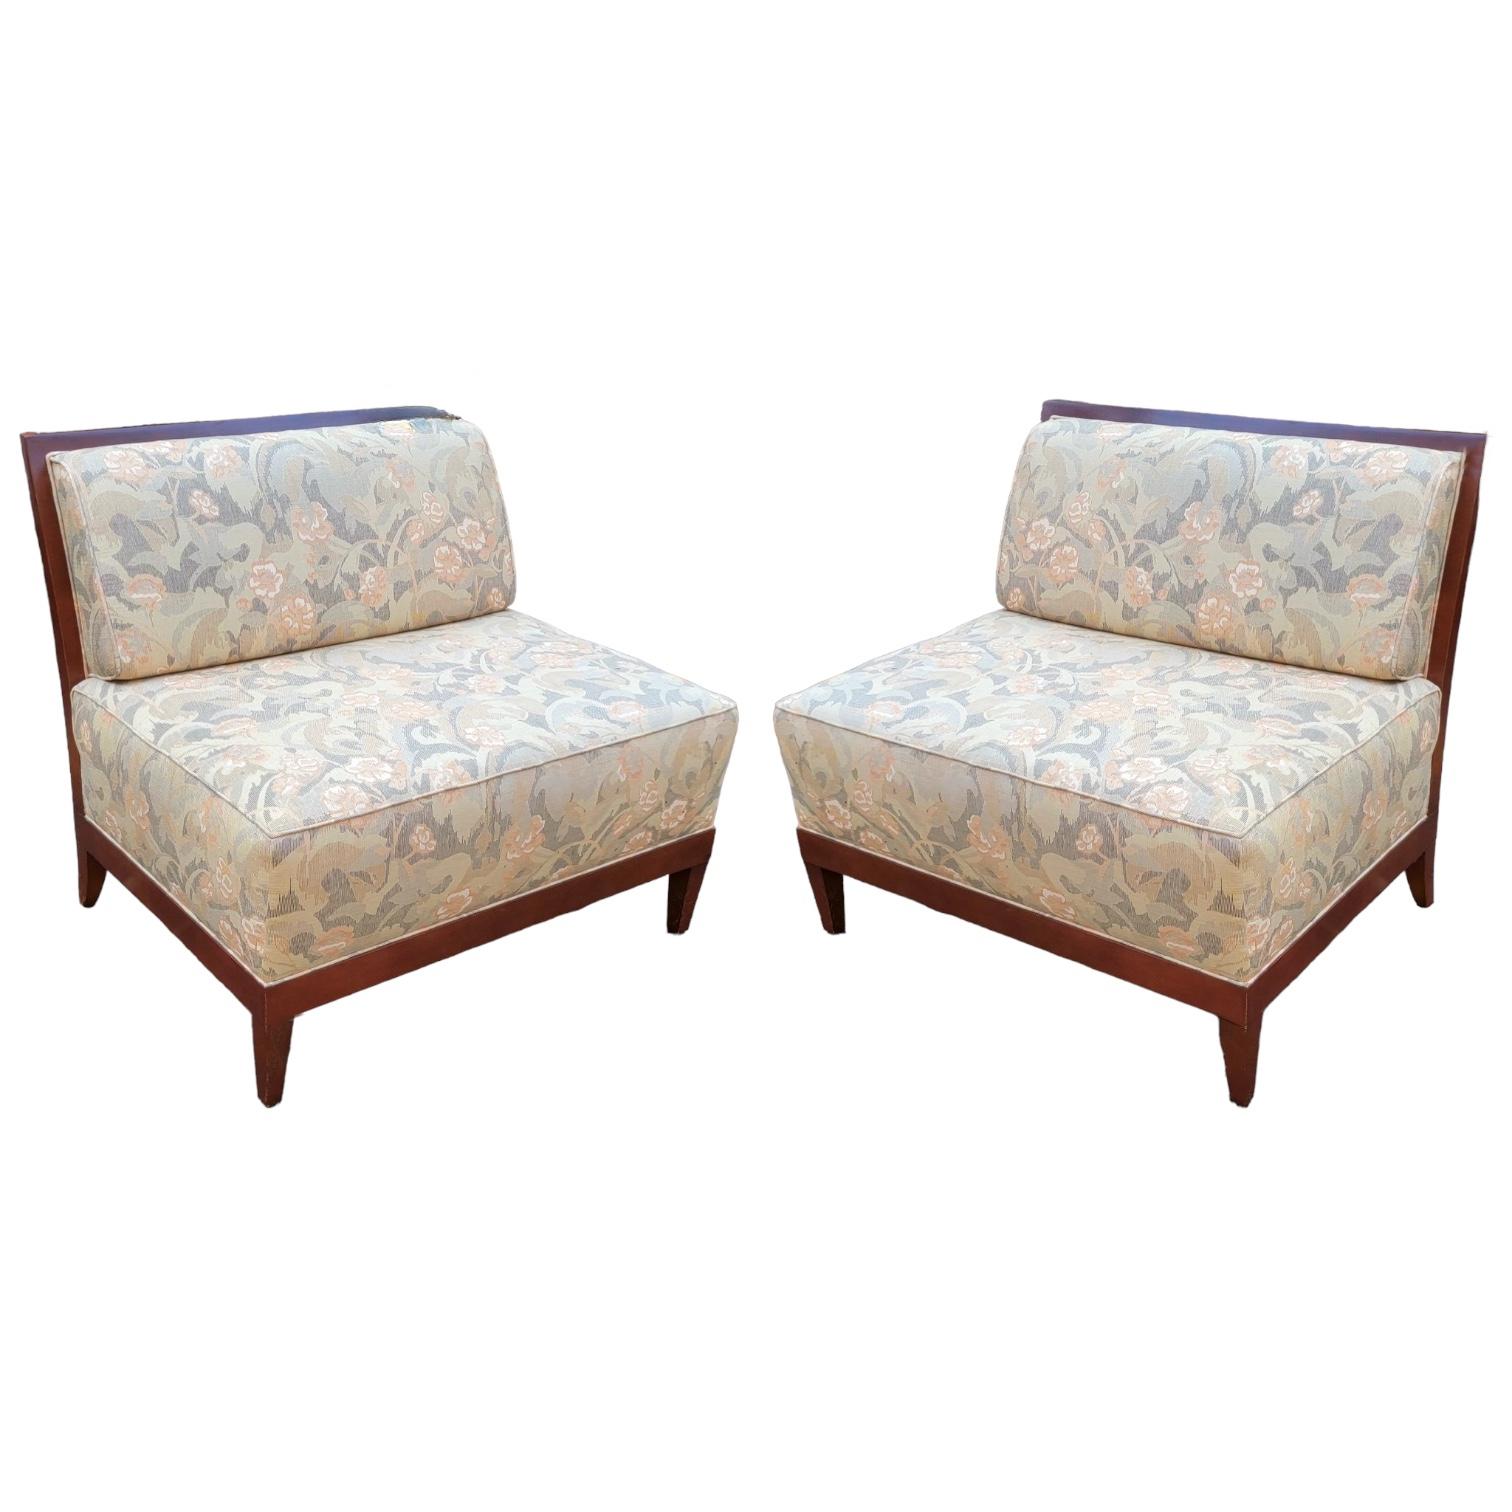 This is a pair of Art Deco style settees by Baker Furniture. The backs are an inlaid mahogany. The upholstery is vintage but in very good condition. They are marked.